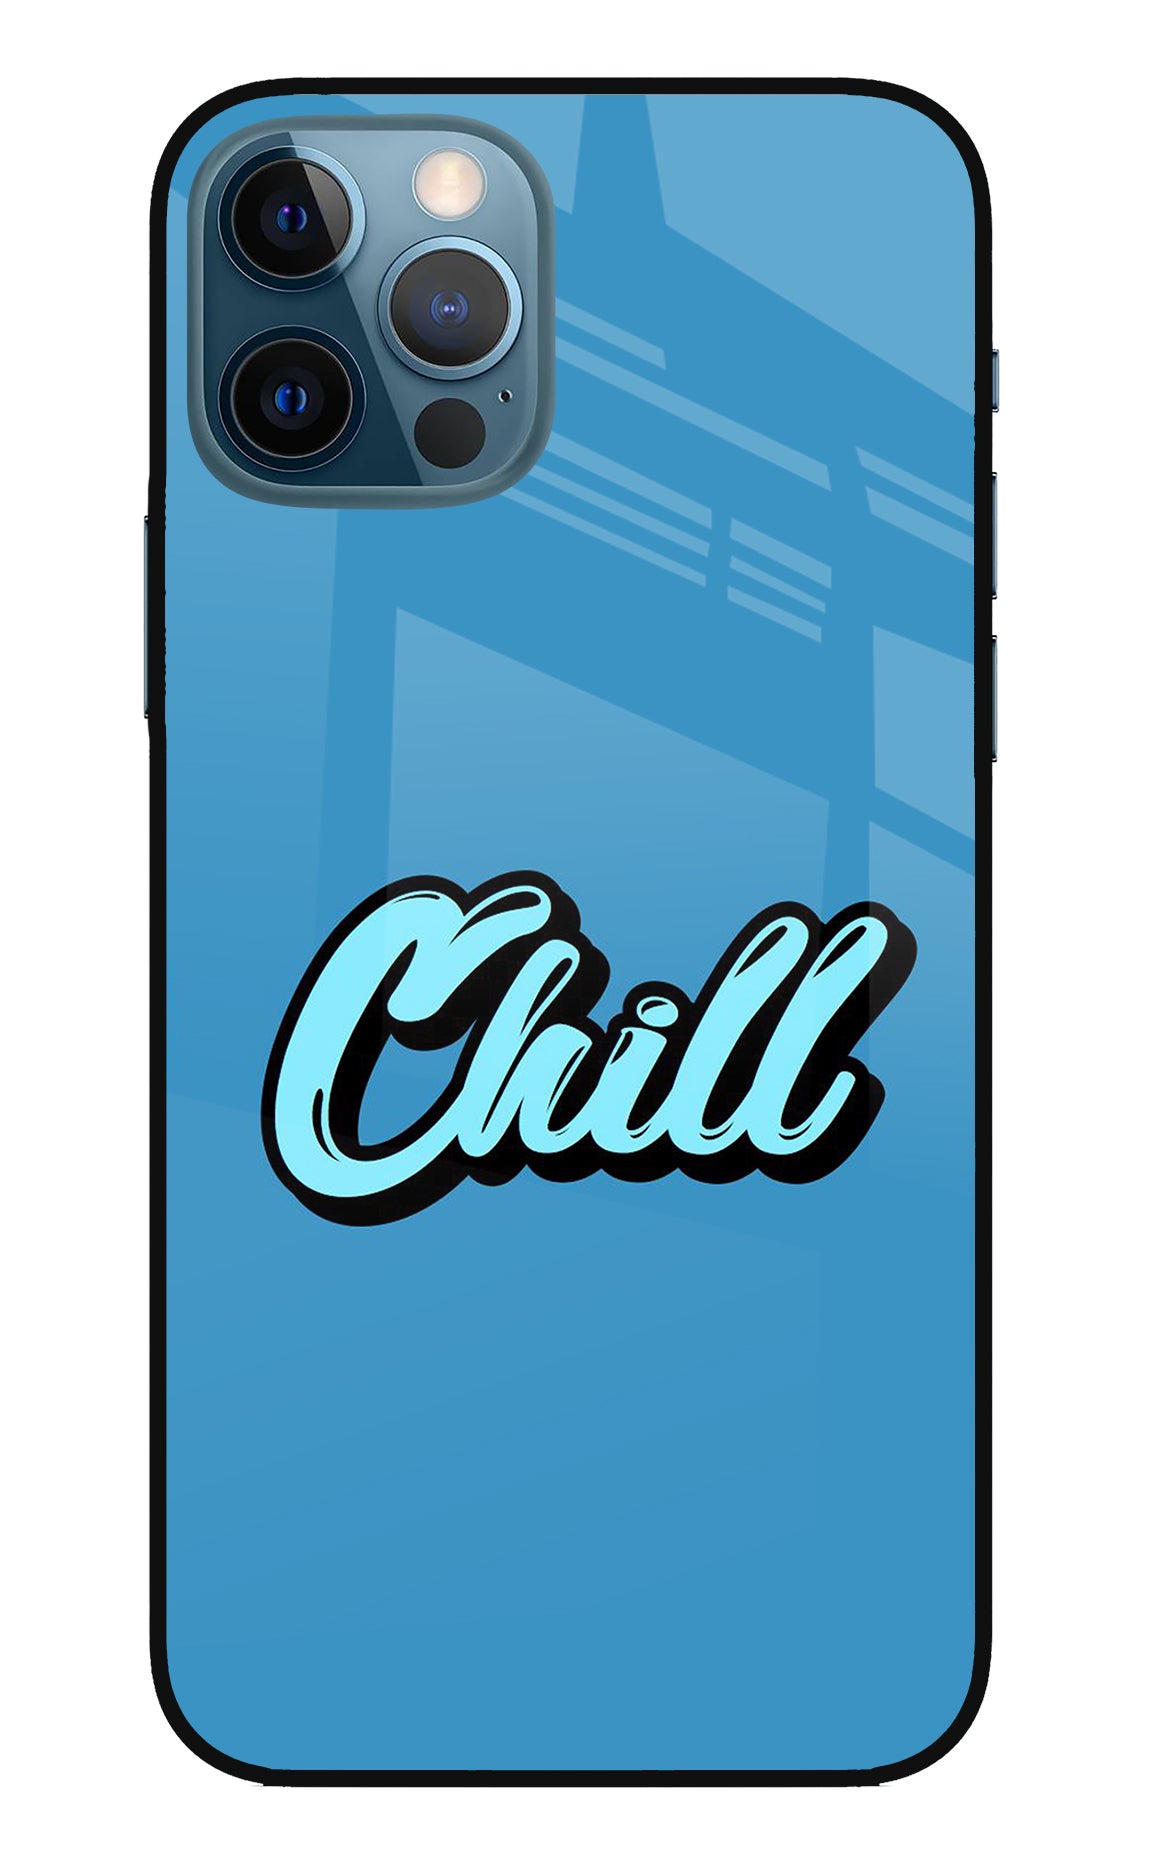 Chill iPhone 12 Pro Back Cover